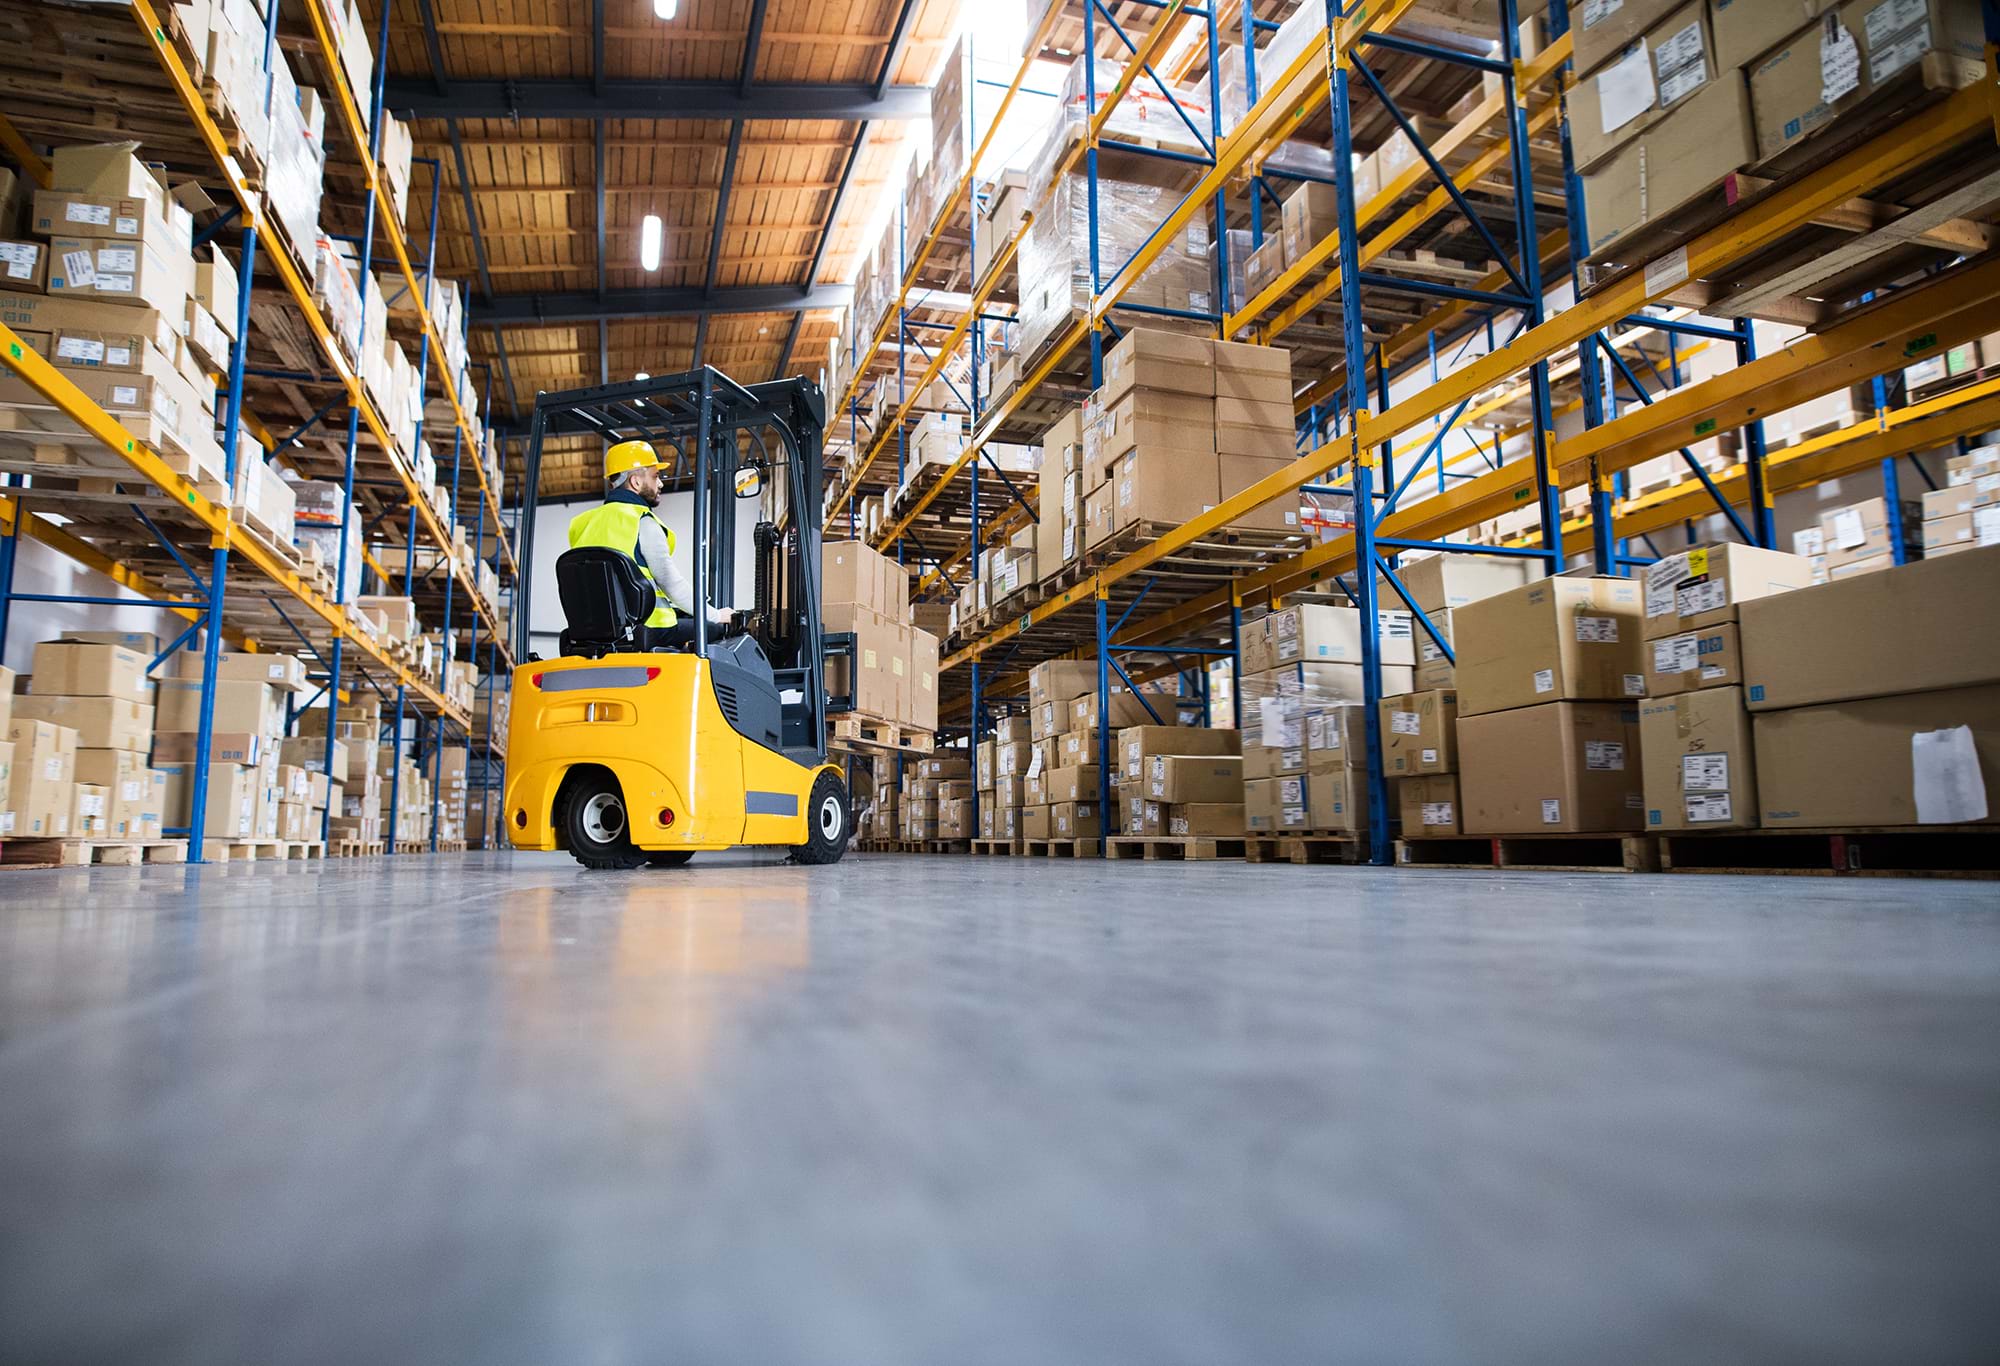 Forklift truck in operation in warehouse